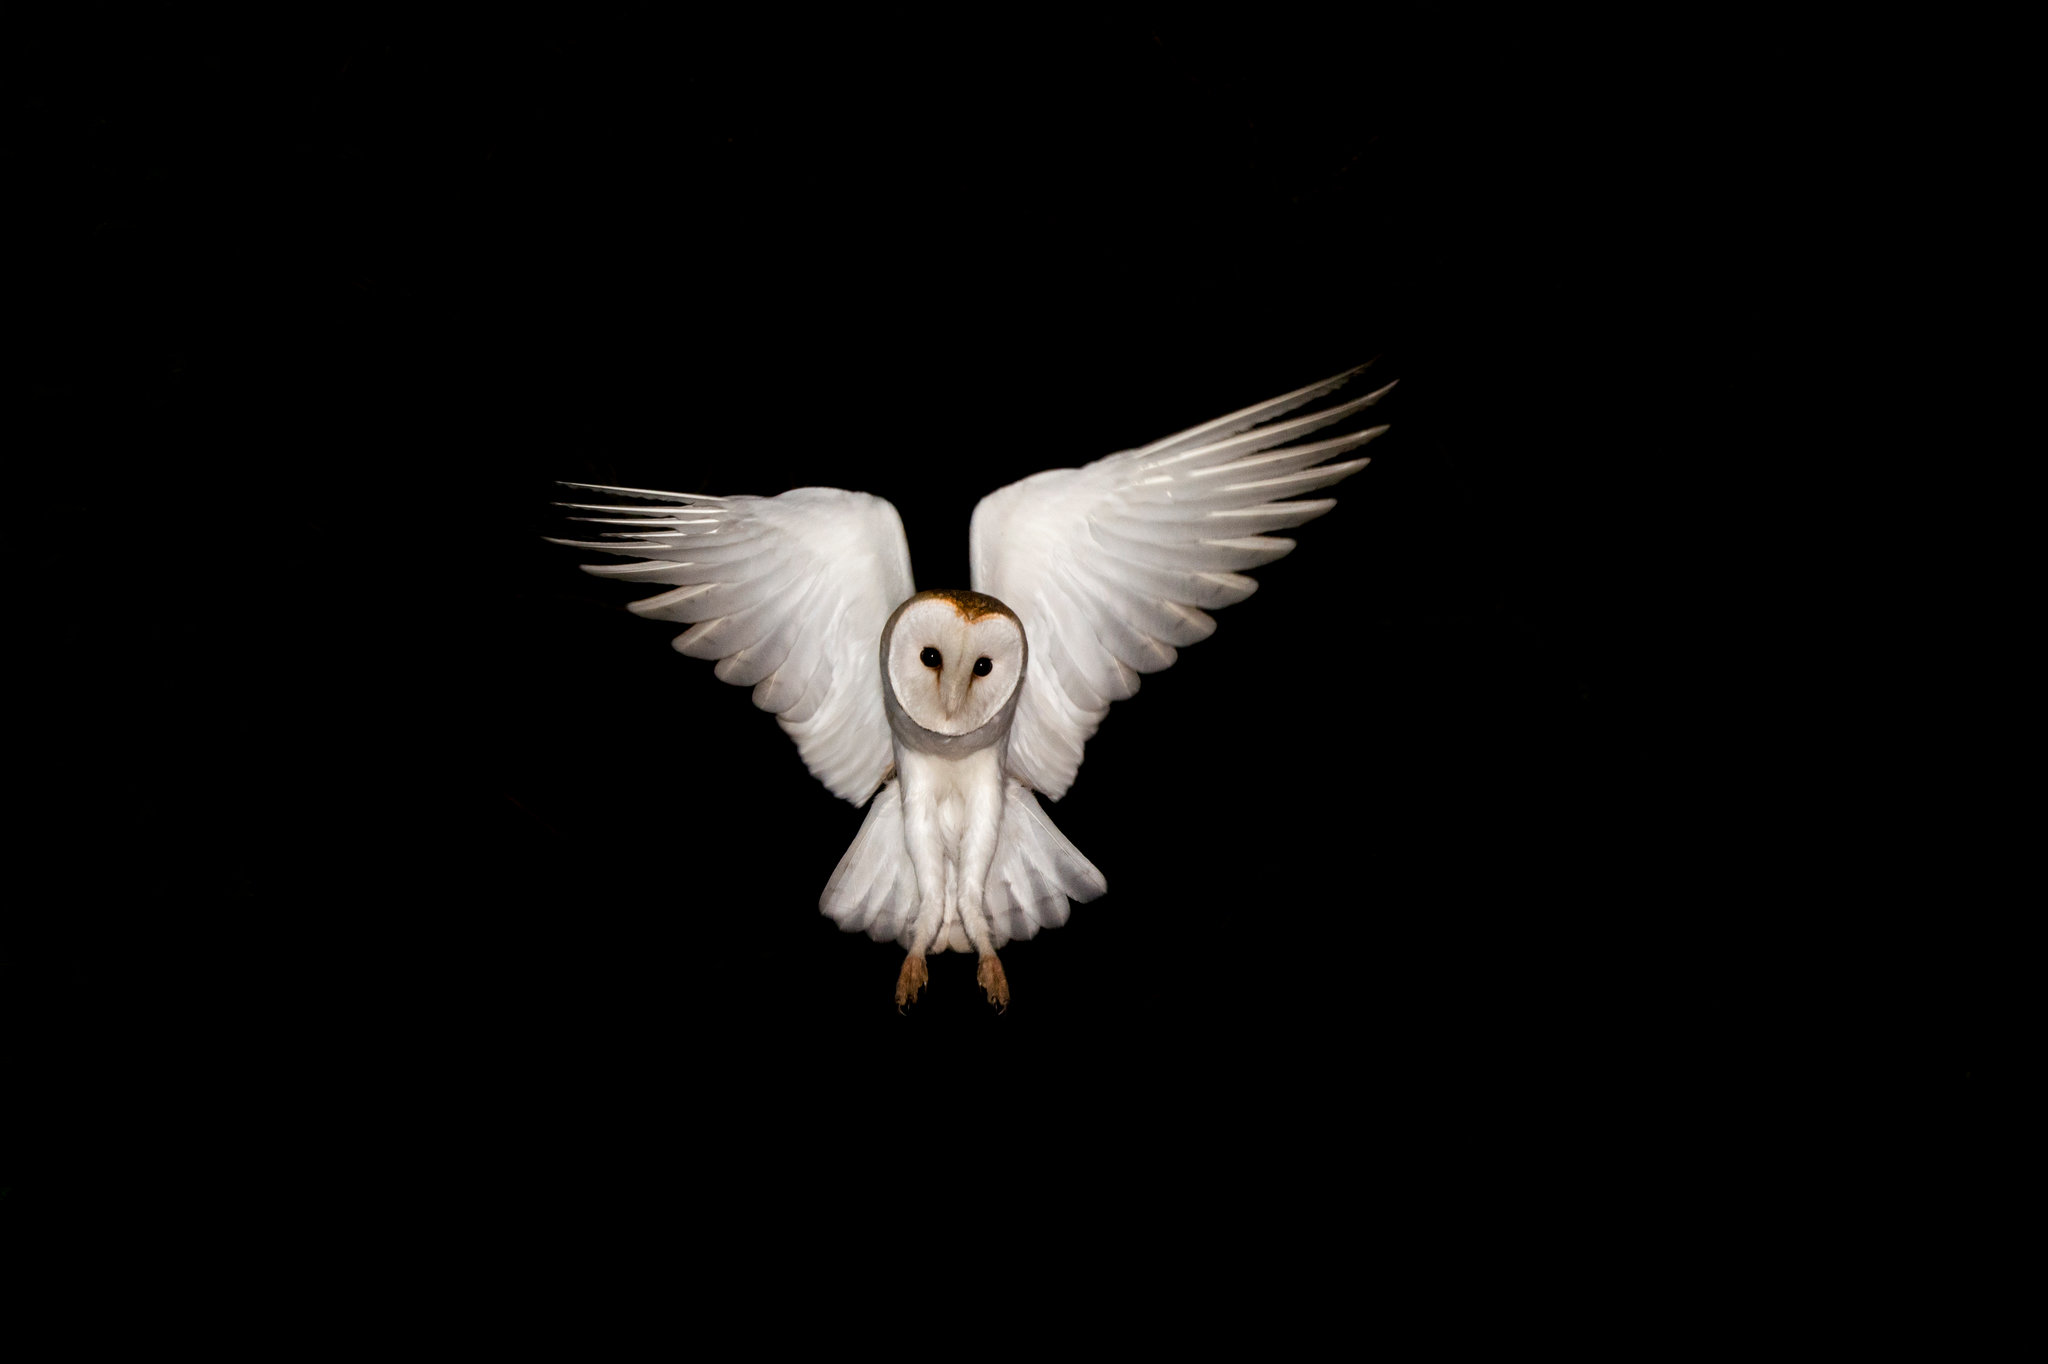 owl spreading its wings